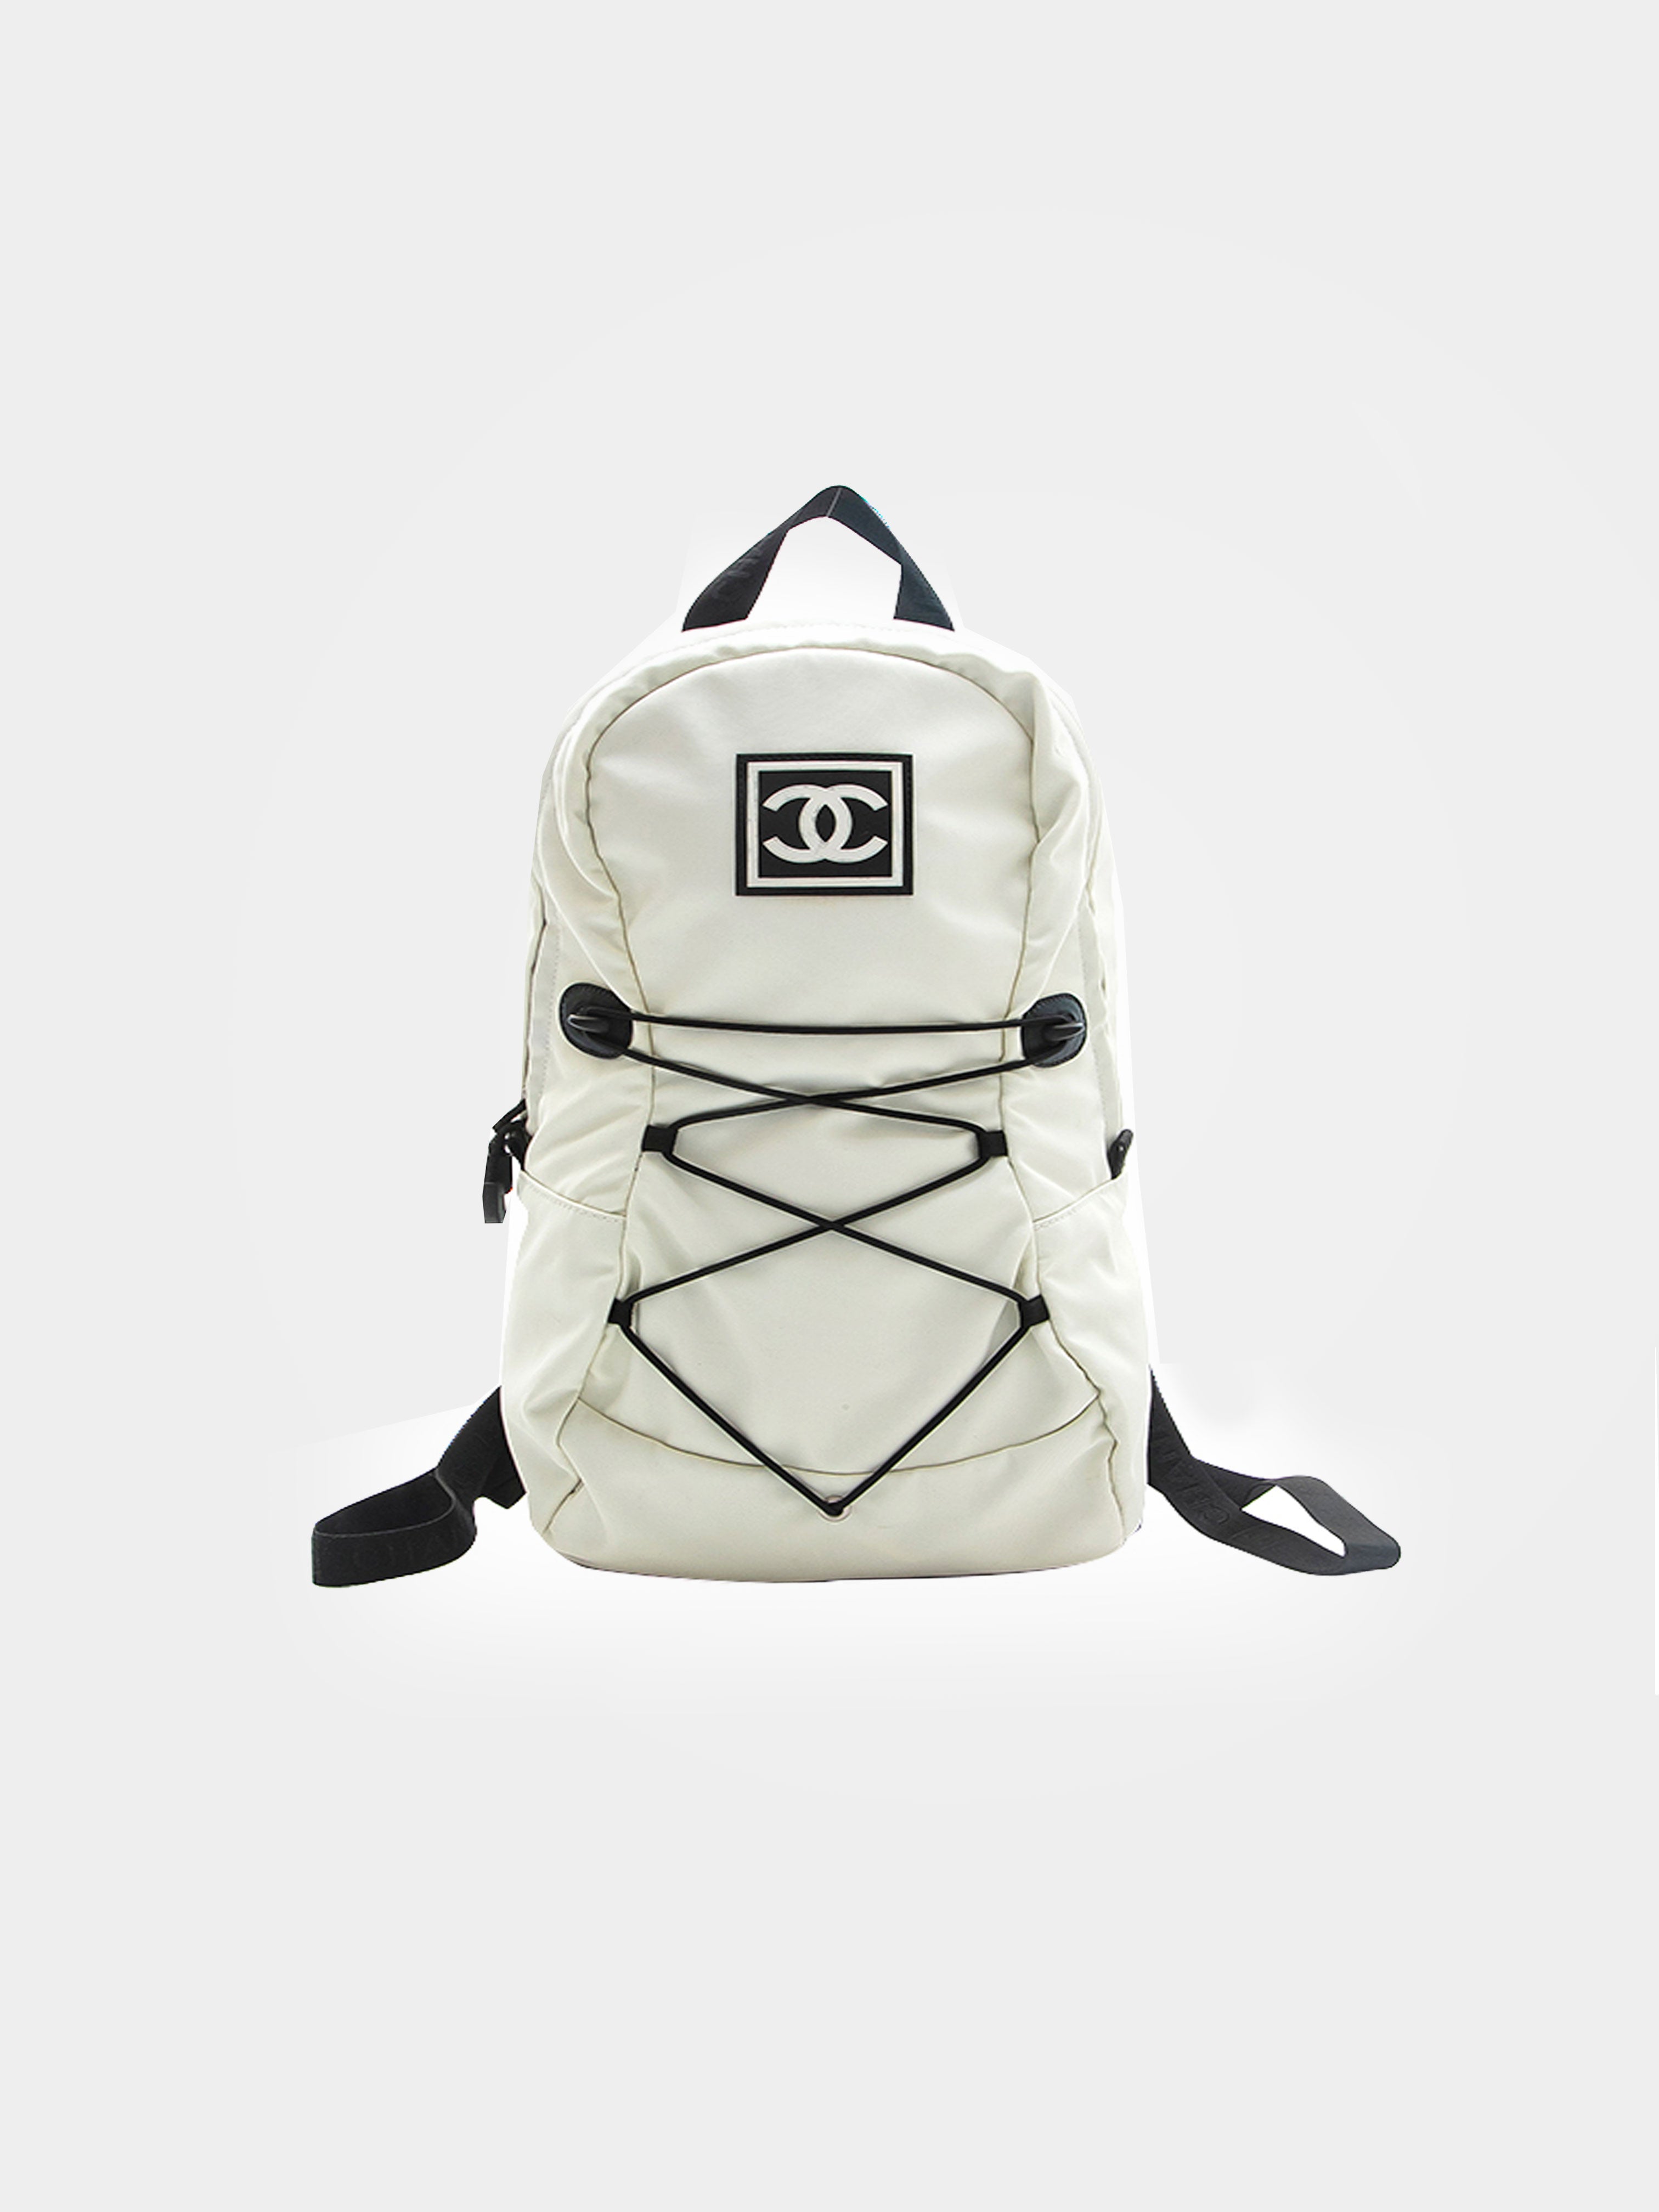 Business Affinity Backpack